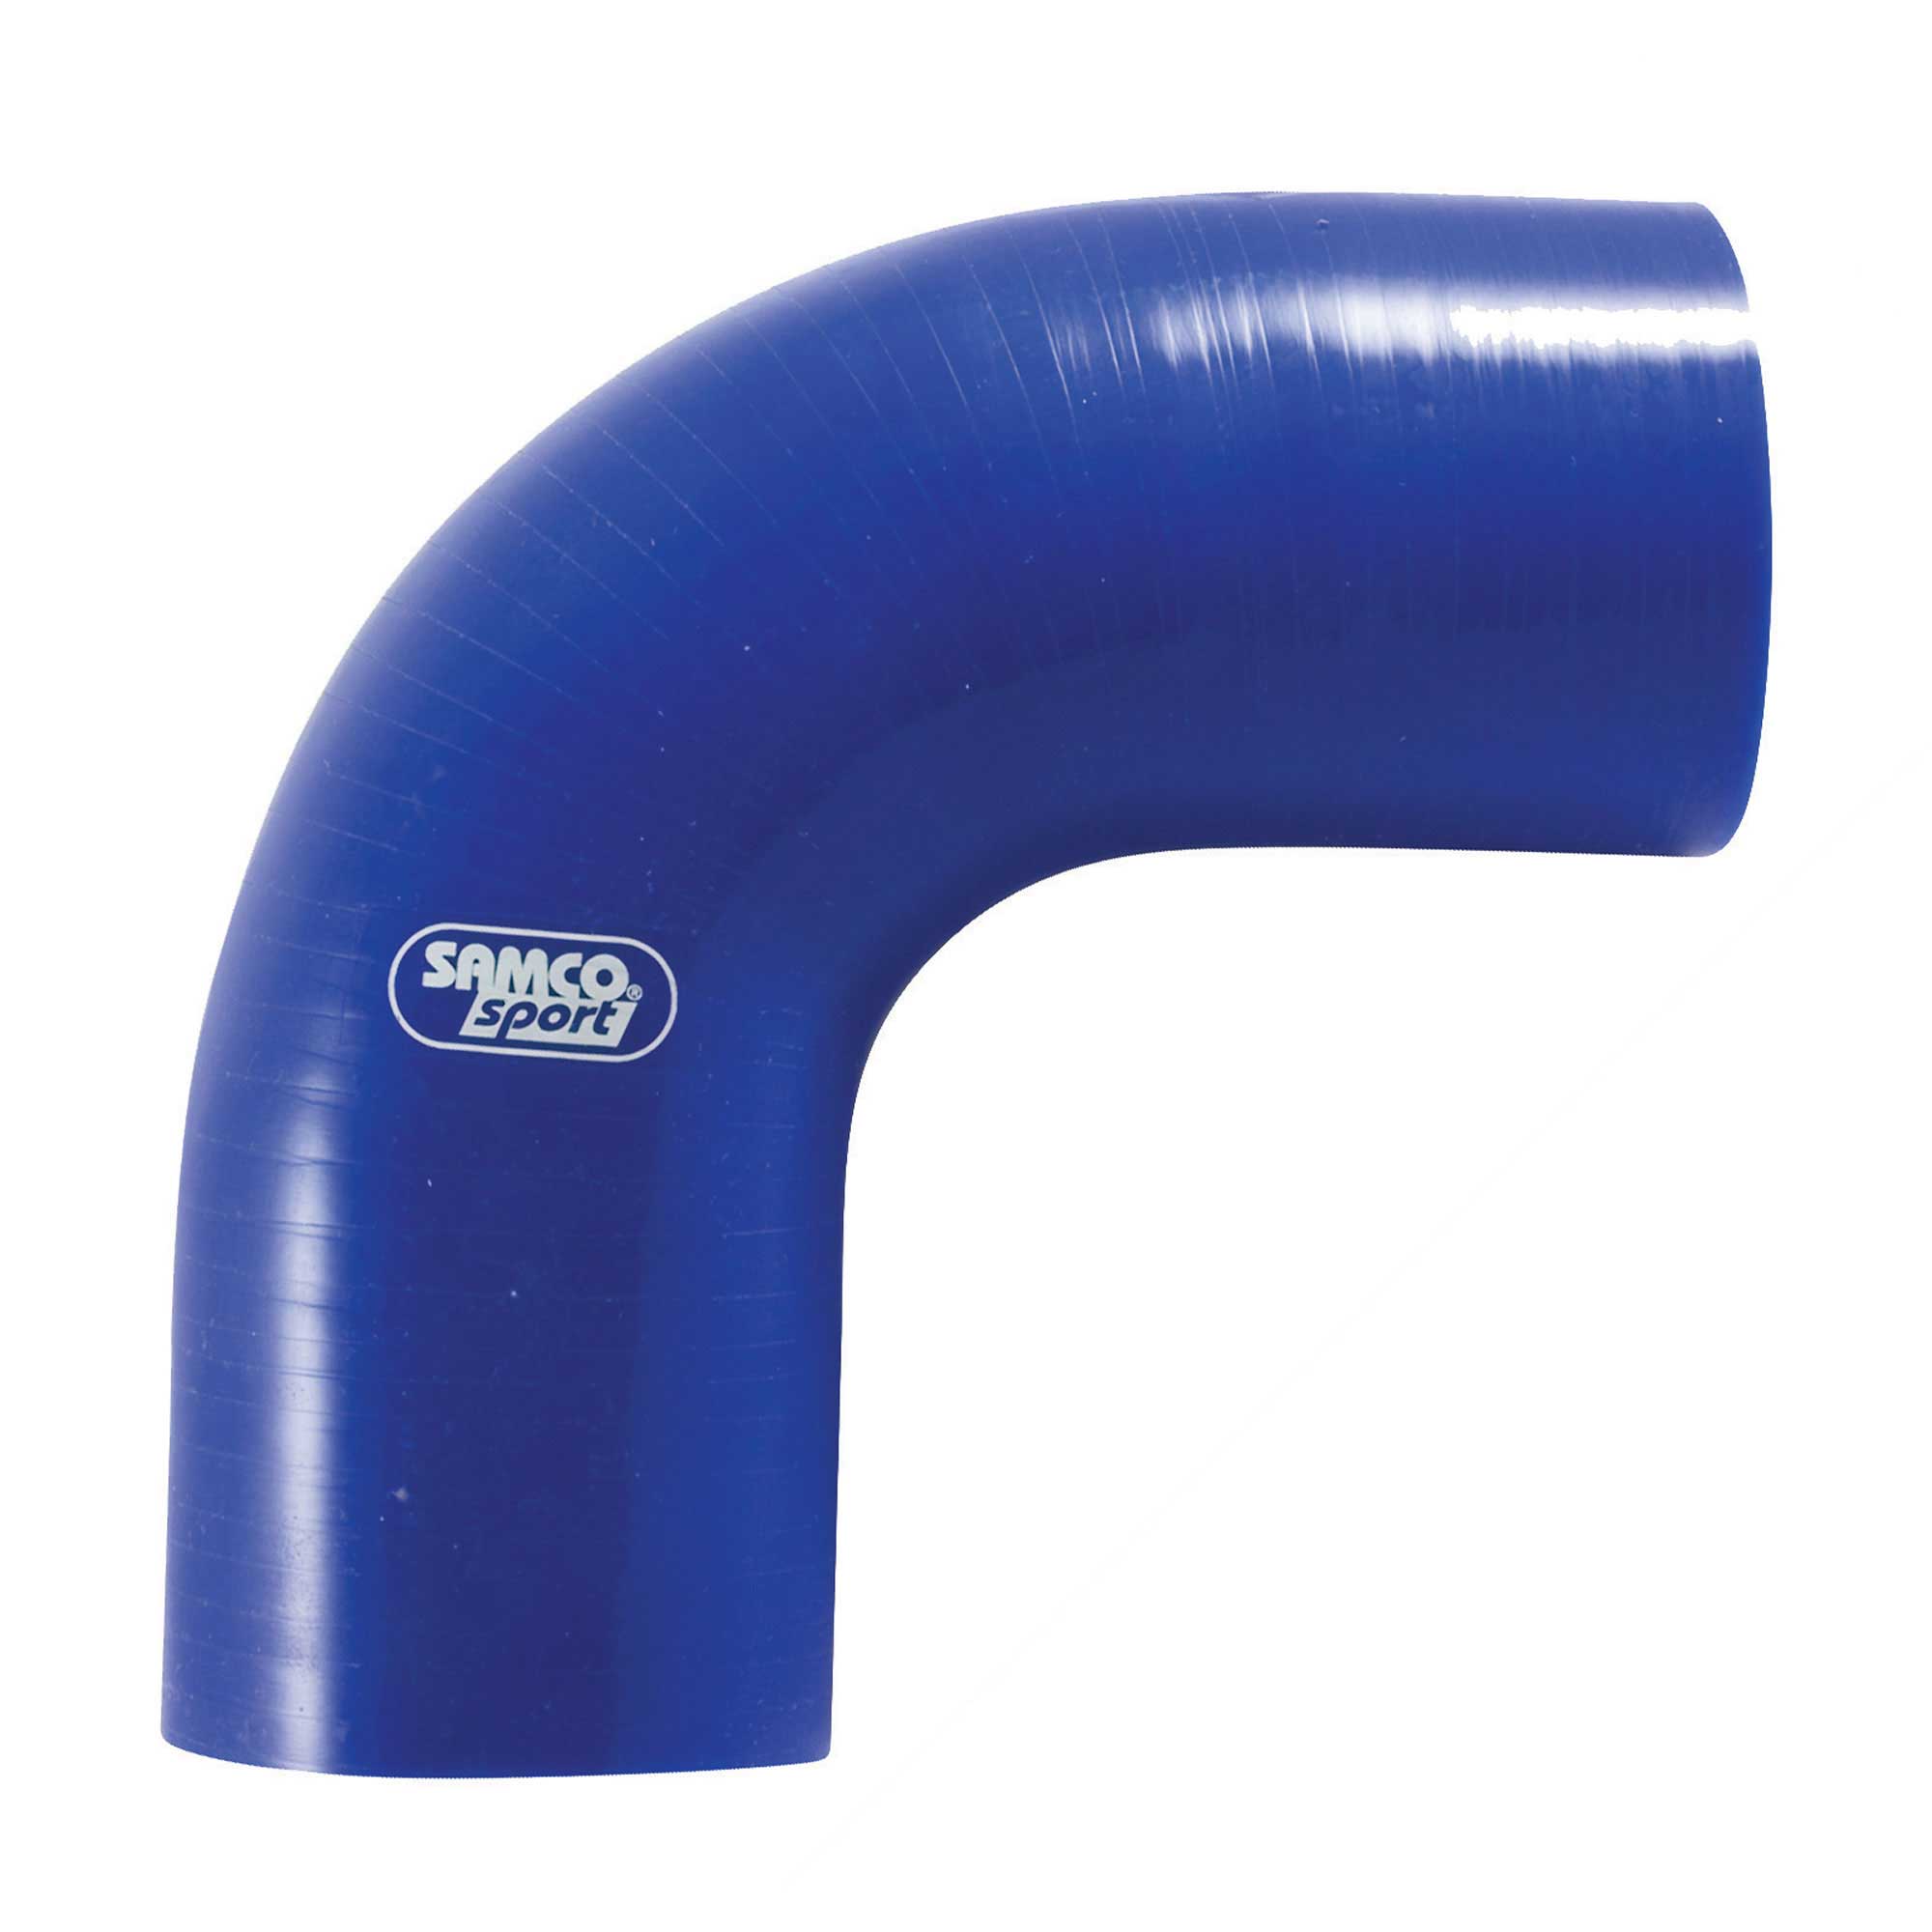 Samco 90 Degree Silicone/Silicon Hose Reducing/Reducer Elbow/Bend 25-19mm Blue 